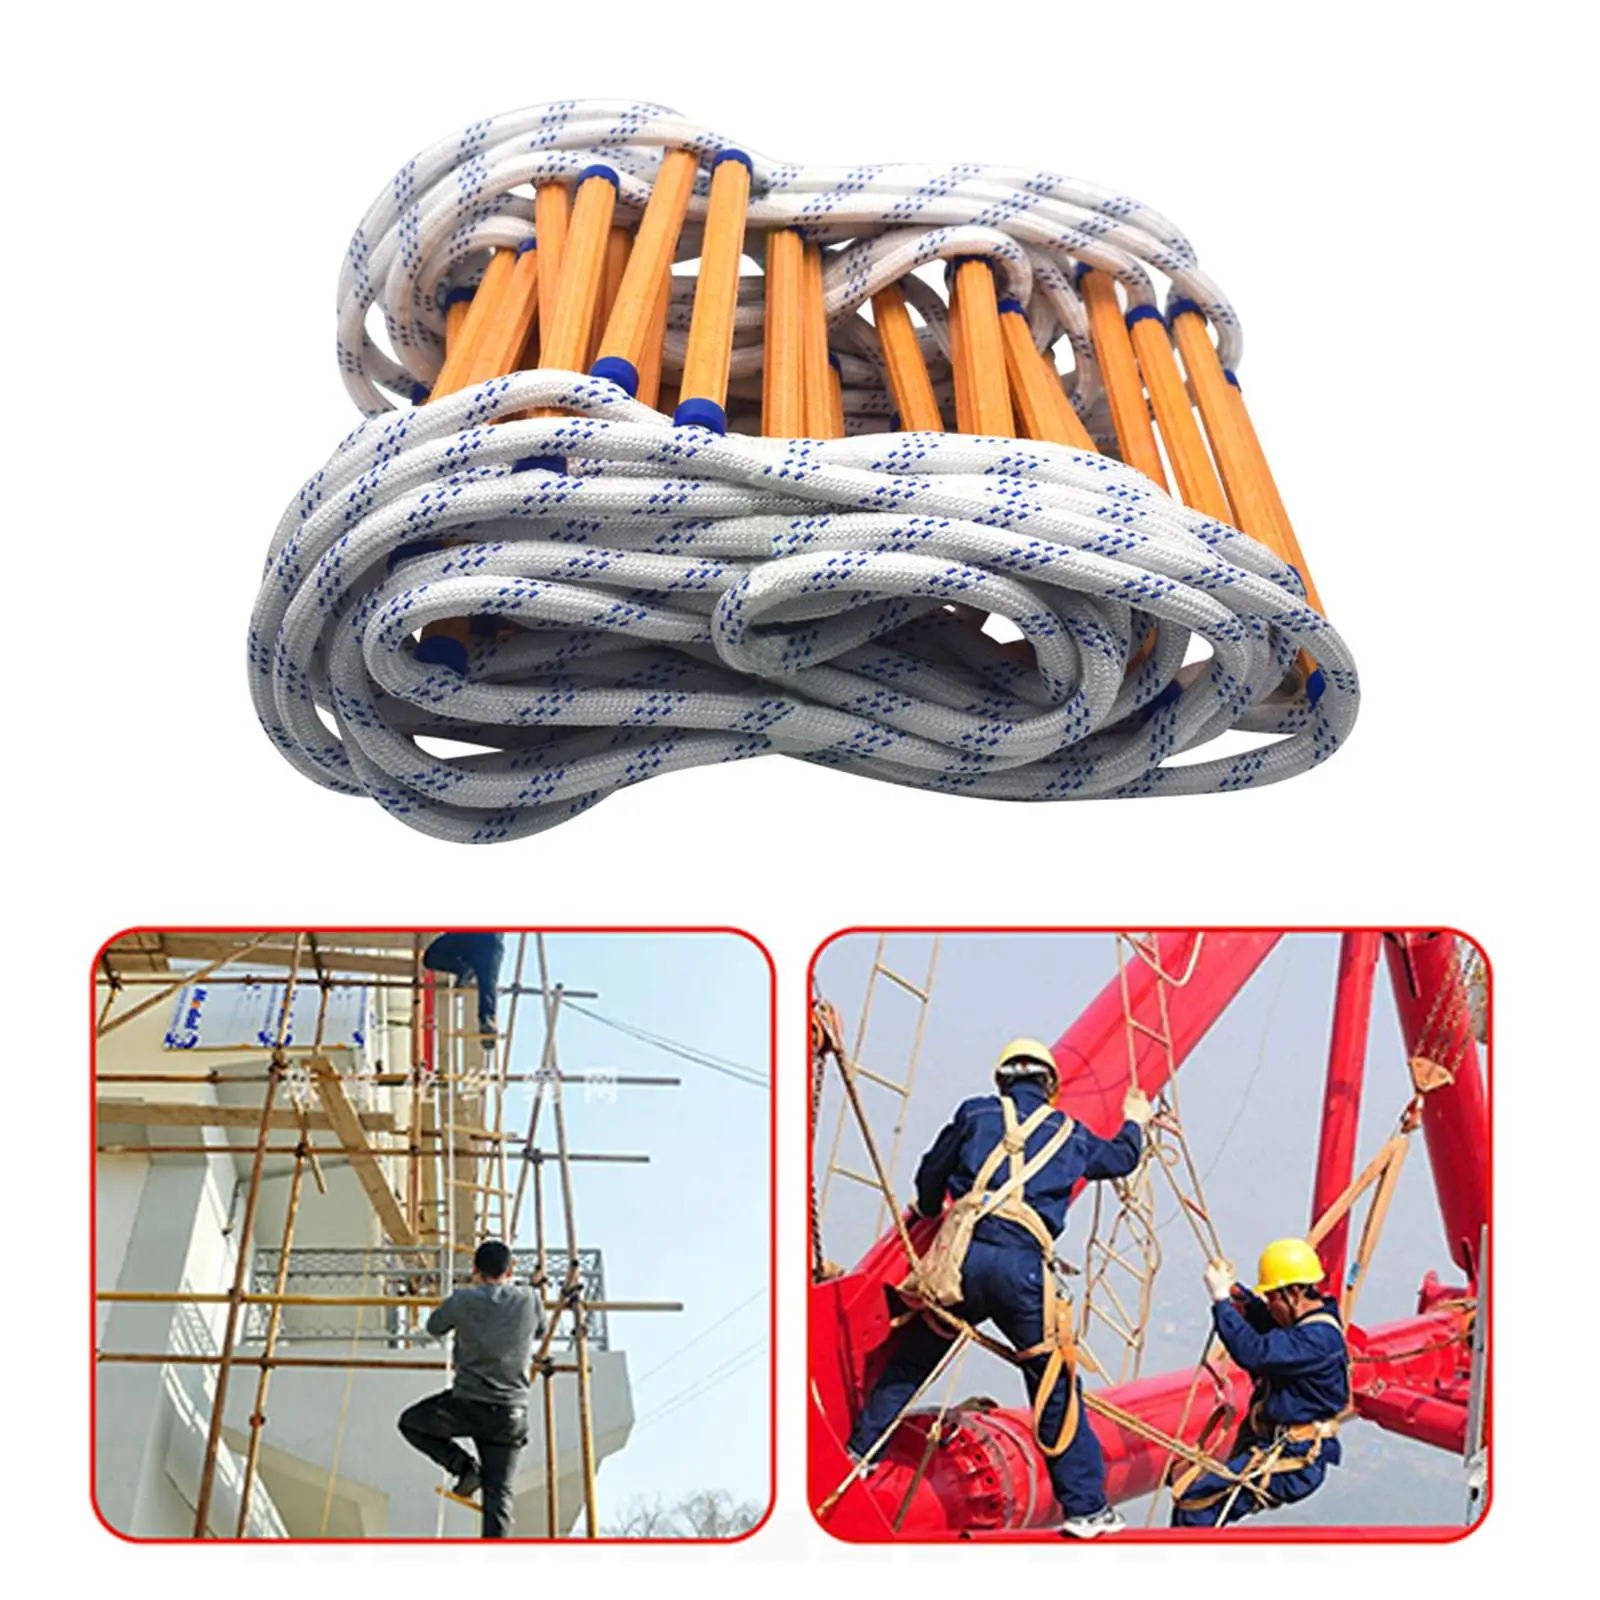 300cm Fire  Ladder, Safety Rope  Ladder with Hook for Kids and Adults Portable and Reusable